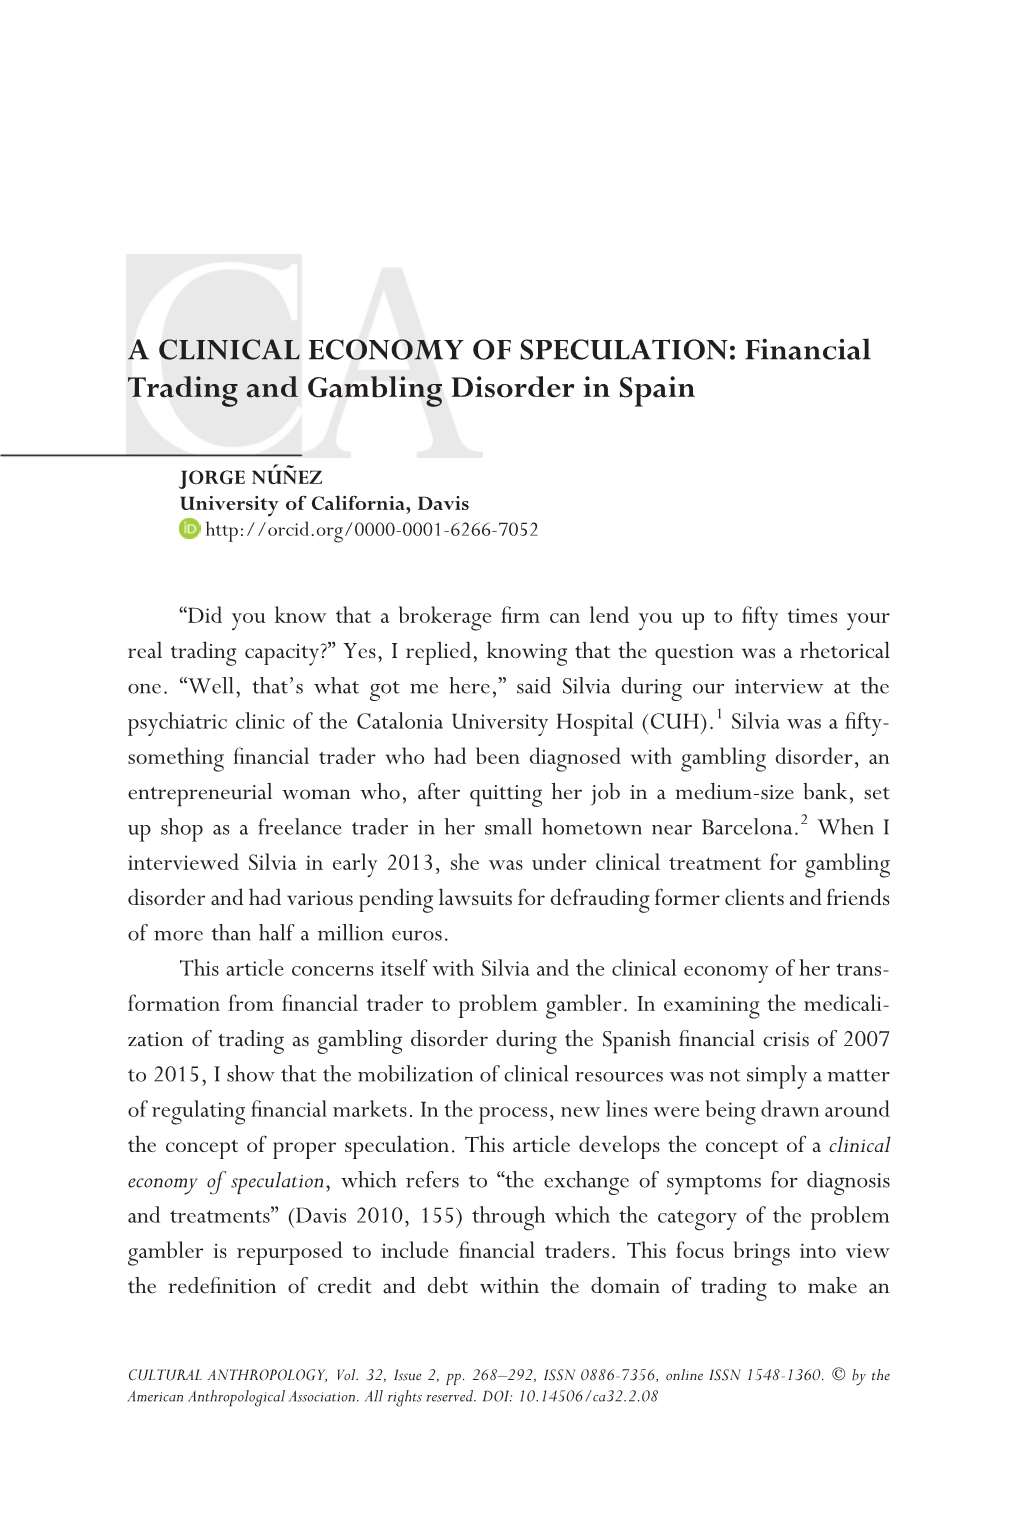 Financial Trading and Gambling Disorder in Spain